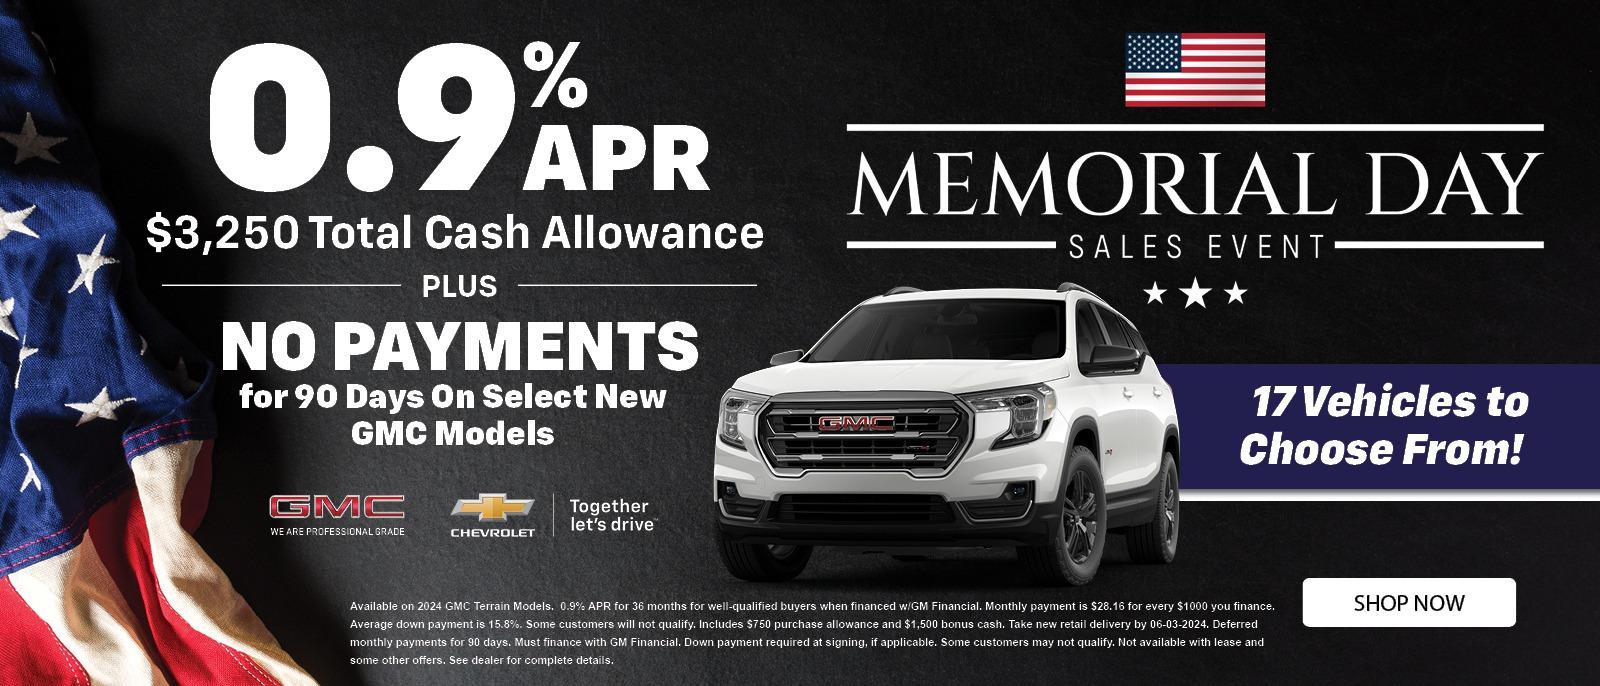 0.9% APR
$3,250 Total Cash Allowance
Plus
No payments for 90 days on select new GMC Models